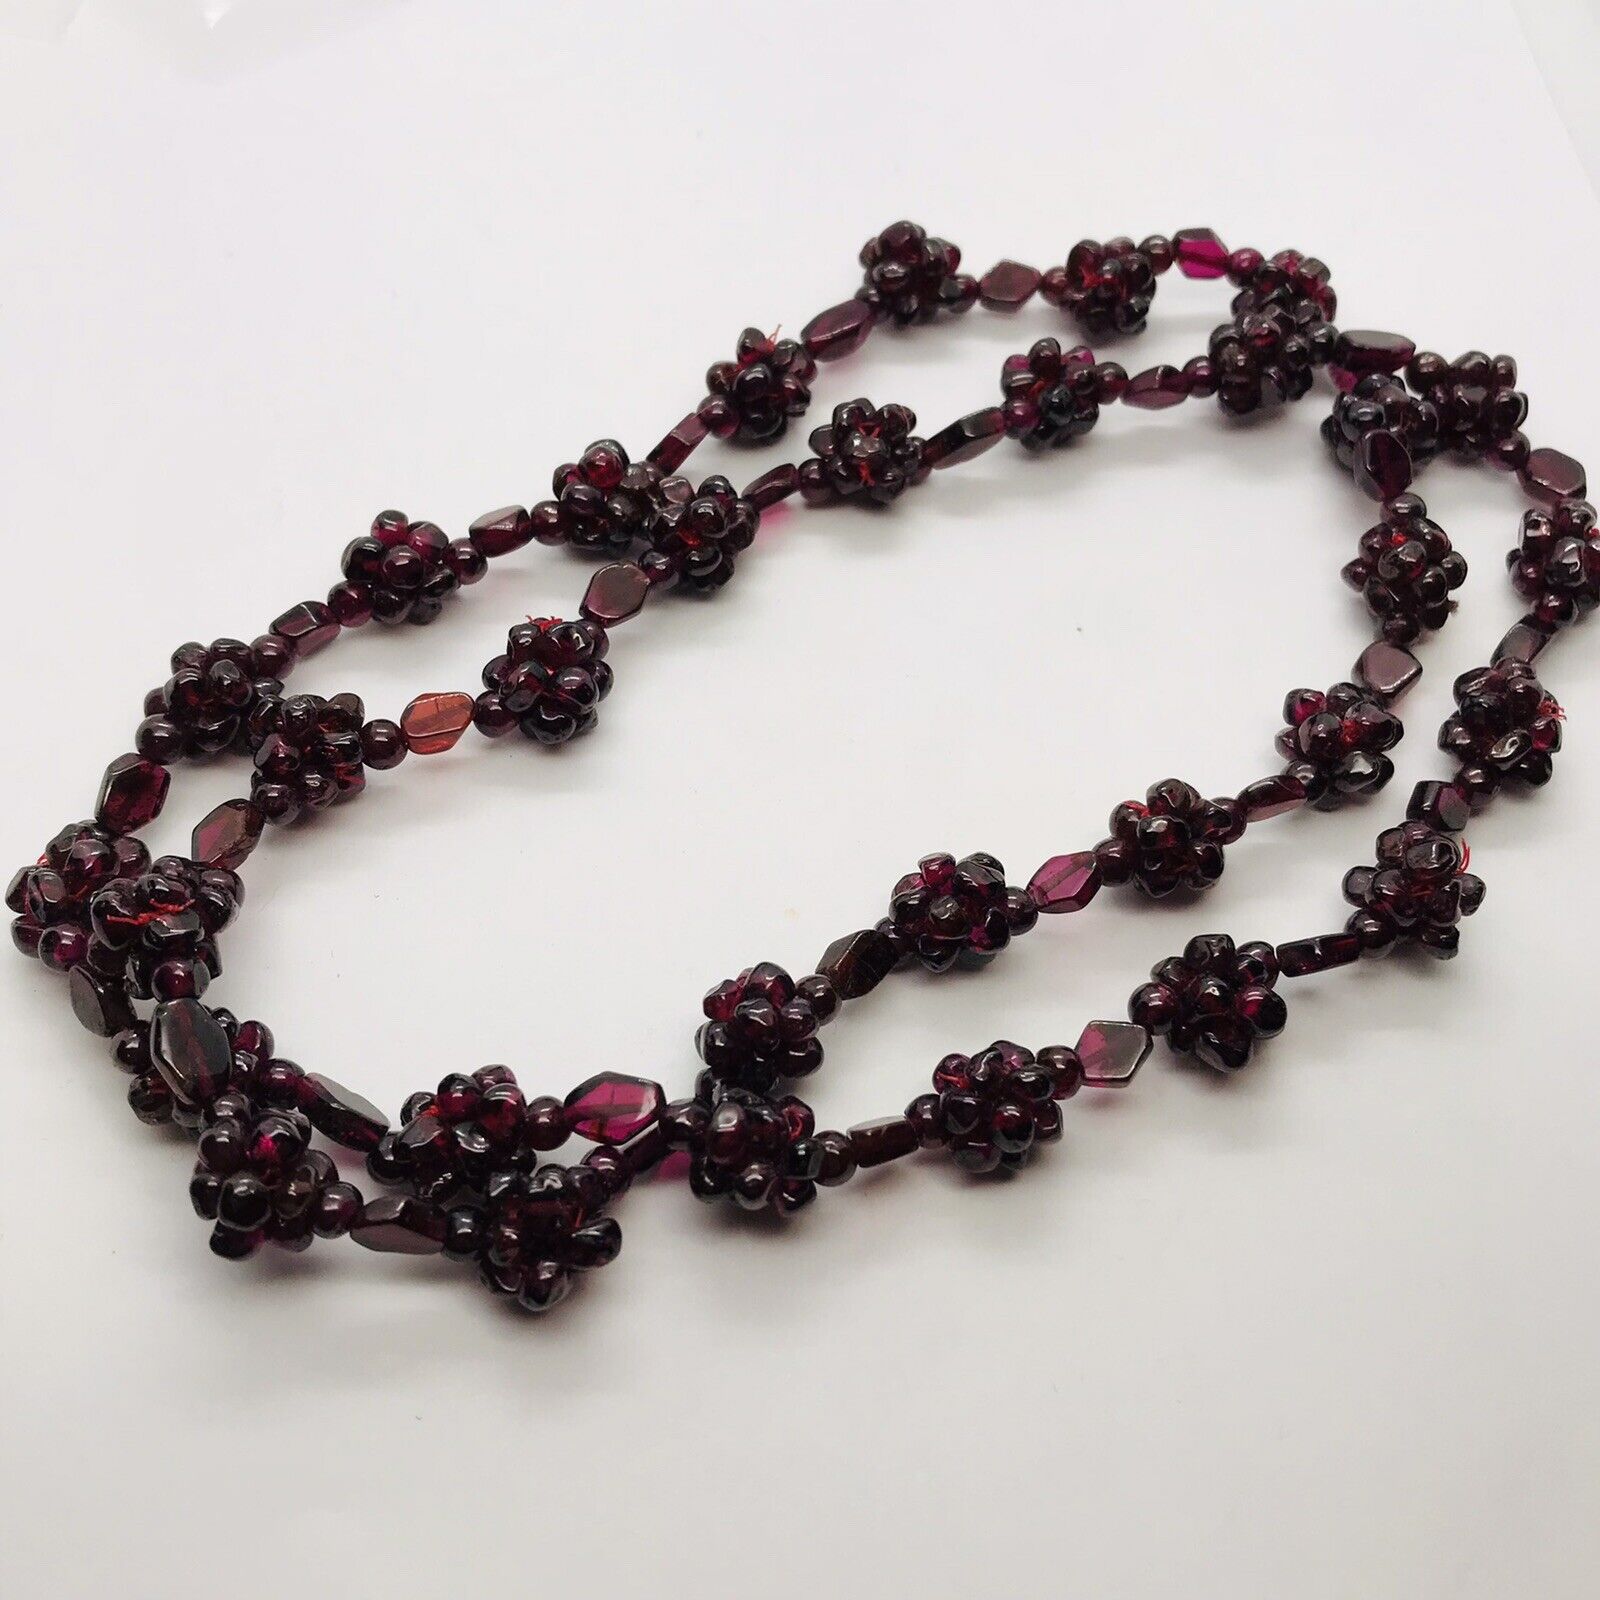 24” HIGH QUALITY HAND STRUNG GARNET BEADED NECKLACE FLORAL FLOWERS